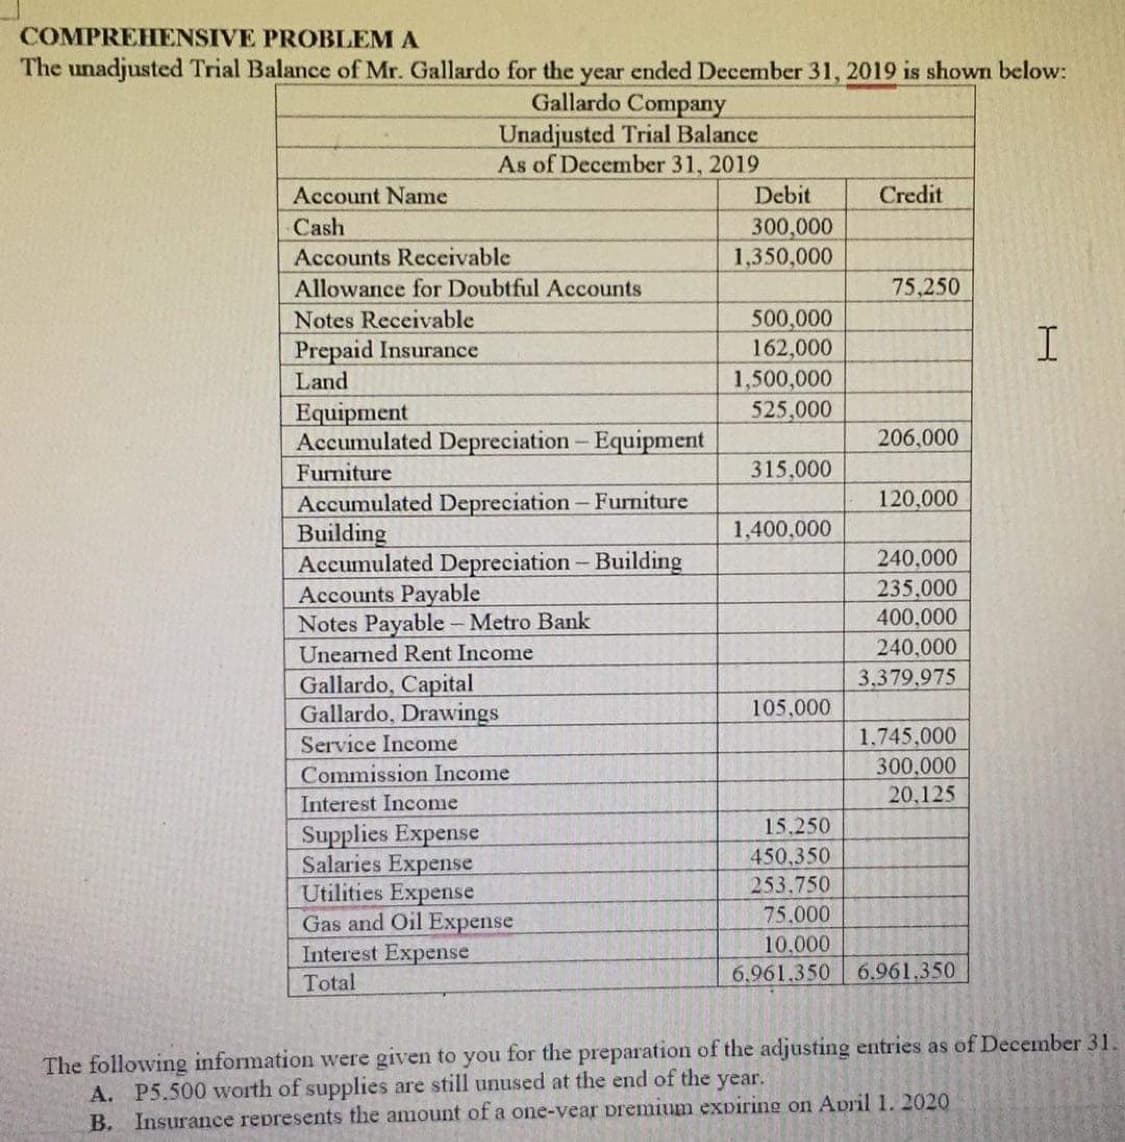 COMPREHENSIVE PROBLEM A
The unadjusted Trial Balance of Mr. Gallardo for the year ended December 31, 2019 is shown below:
Gallardo Company
Unadjusted Trial Balance
As of December 31, 2019
Account Name
Cash
Accounts Receivable
Allowance for Doubtful Accounts
Notes Receivable
Prepaid Insurance
Land
Equipment
Accumulated Depreciation - Equipment
Furniture
Accumulated Depreciation - Furniture
Building
Accumulated Depreciation - Building
Accounts Payable
Notes Payable - Metro Bank
Unearned Rent Income
Gallardo, Capital
Gallardo, Drawings
Service Income
Commission Income
Interest Income
Supplies Expense
Salaries Expense
Utilities Expense
Gas and Oil Expense
Interest Expense
Total
Debit
300,000
1,350,000
500,000
162,000
1,500,000
525,000
315,000
1,400,000
105,000
Credit
75,250
206,000
120,000
240,000
235,000
400,000
240,000
3,379,975
1,745,000
300,000
20,125
15,250
450,350
253.750
75,000
10.000
6.961.350 6.961.350
T
The following information were given to you for the preparation of the adjusting entries as of December 31.
A. P5.500 worth of supplies are still unused at the end of the
year.
B. Insurance represents the amount of a one-year premium expiring on April 1. 2020